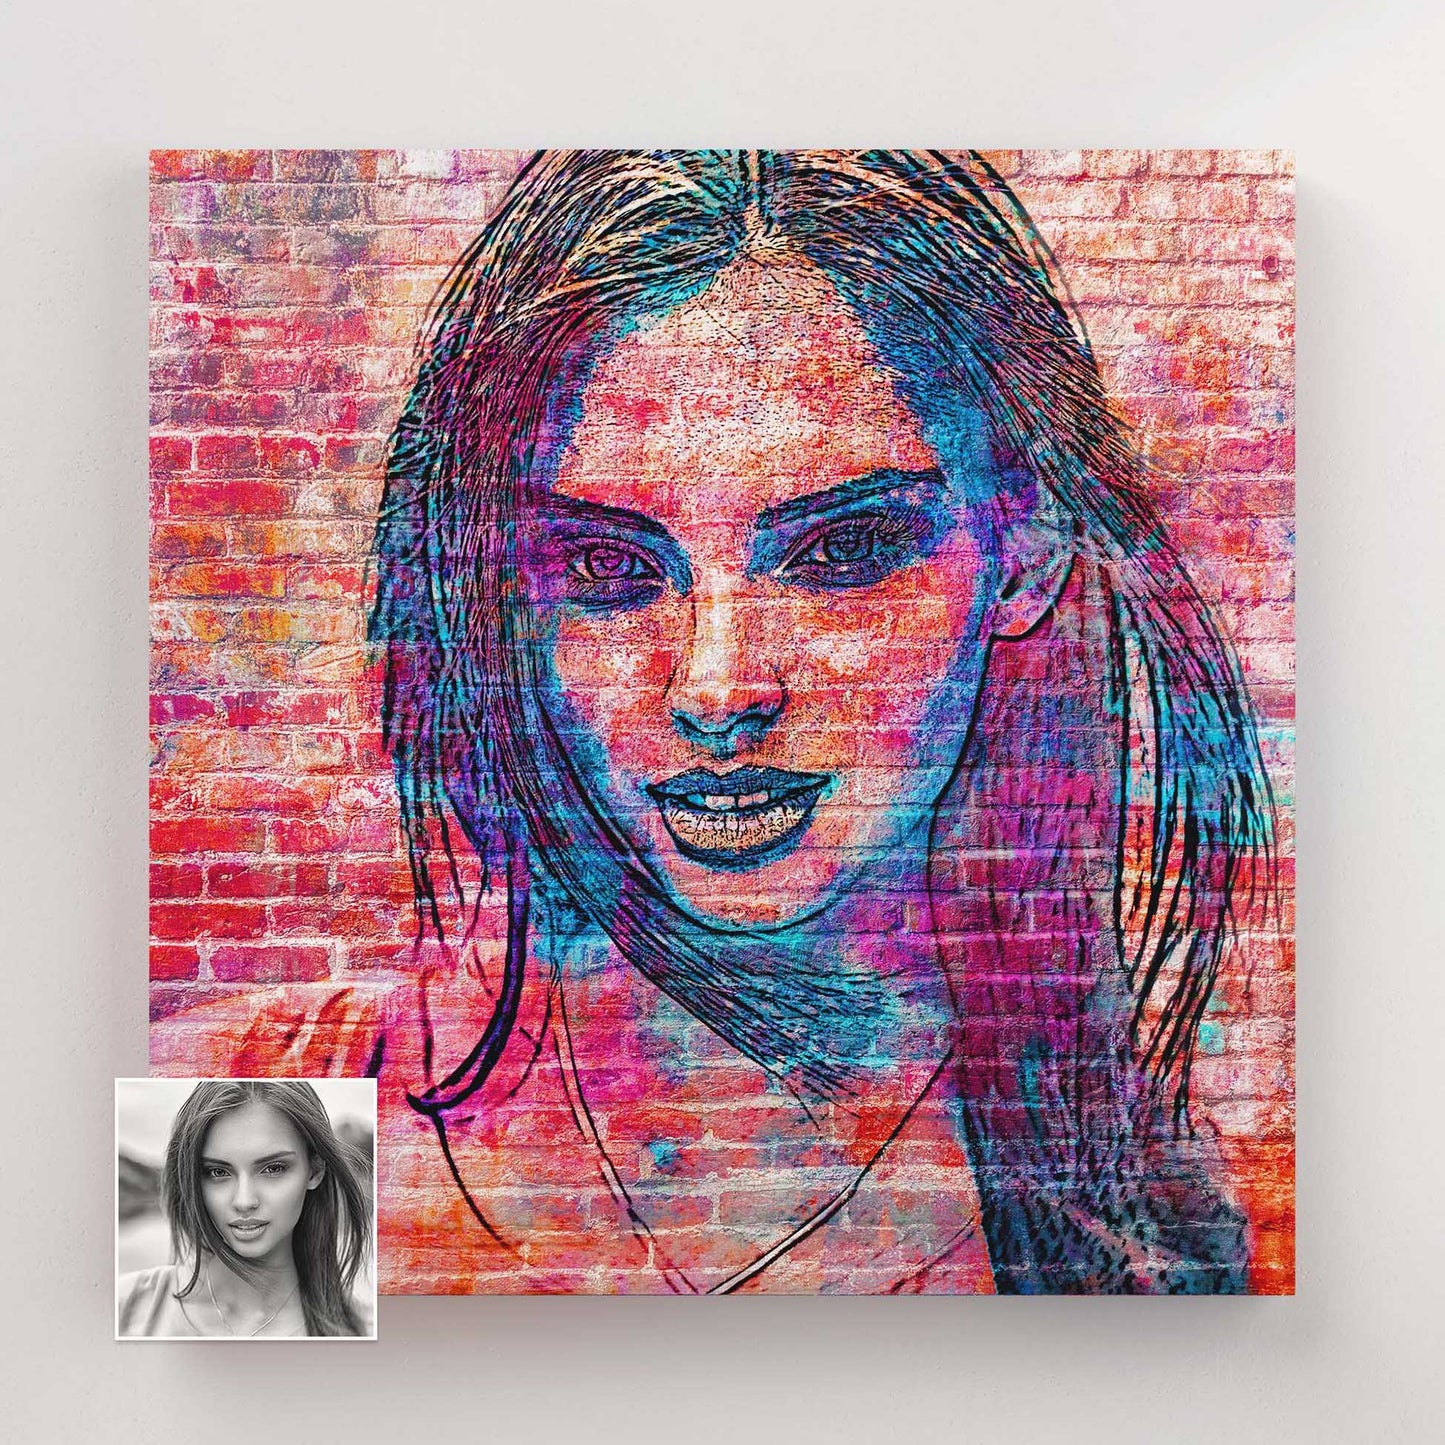 Street Art at Home - Personalised Brick Graffiti Street Art Canvas - Create a unique and urban vibe in your living space with this wall art. The artistic graffiti design on a brick canvas captures the energy and creativity of street art